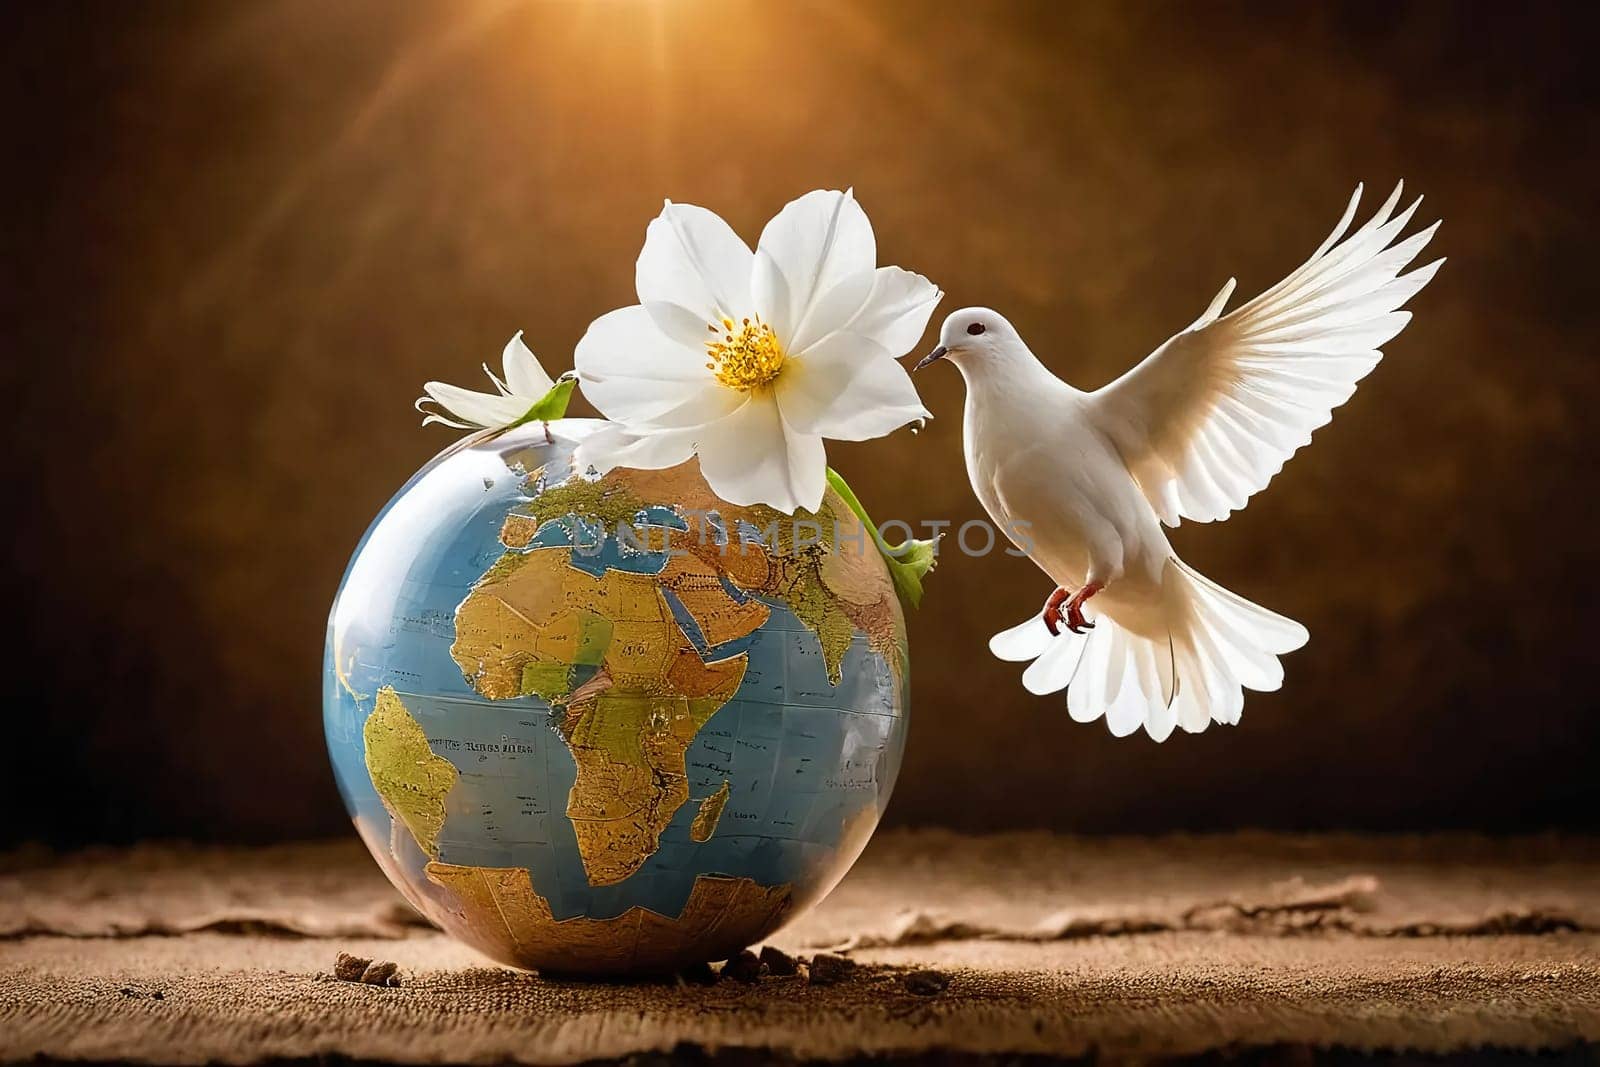 The dove of peace flies over the globe. High quality photo